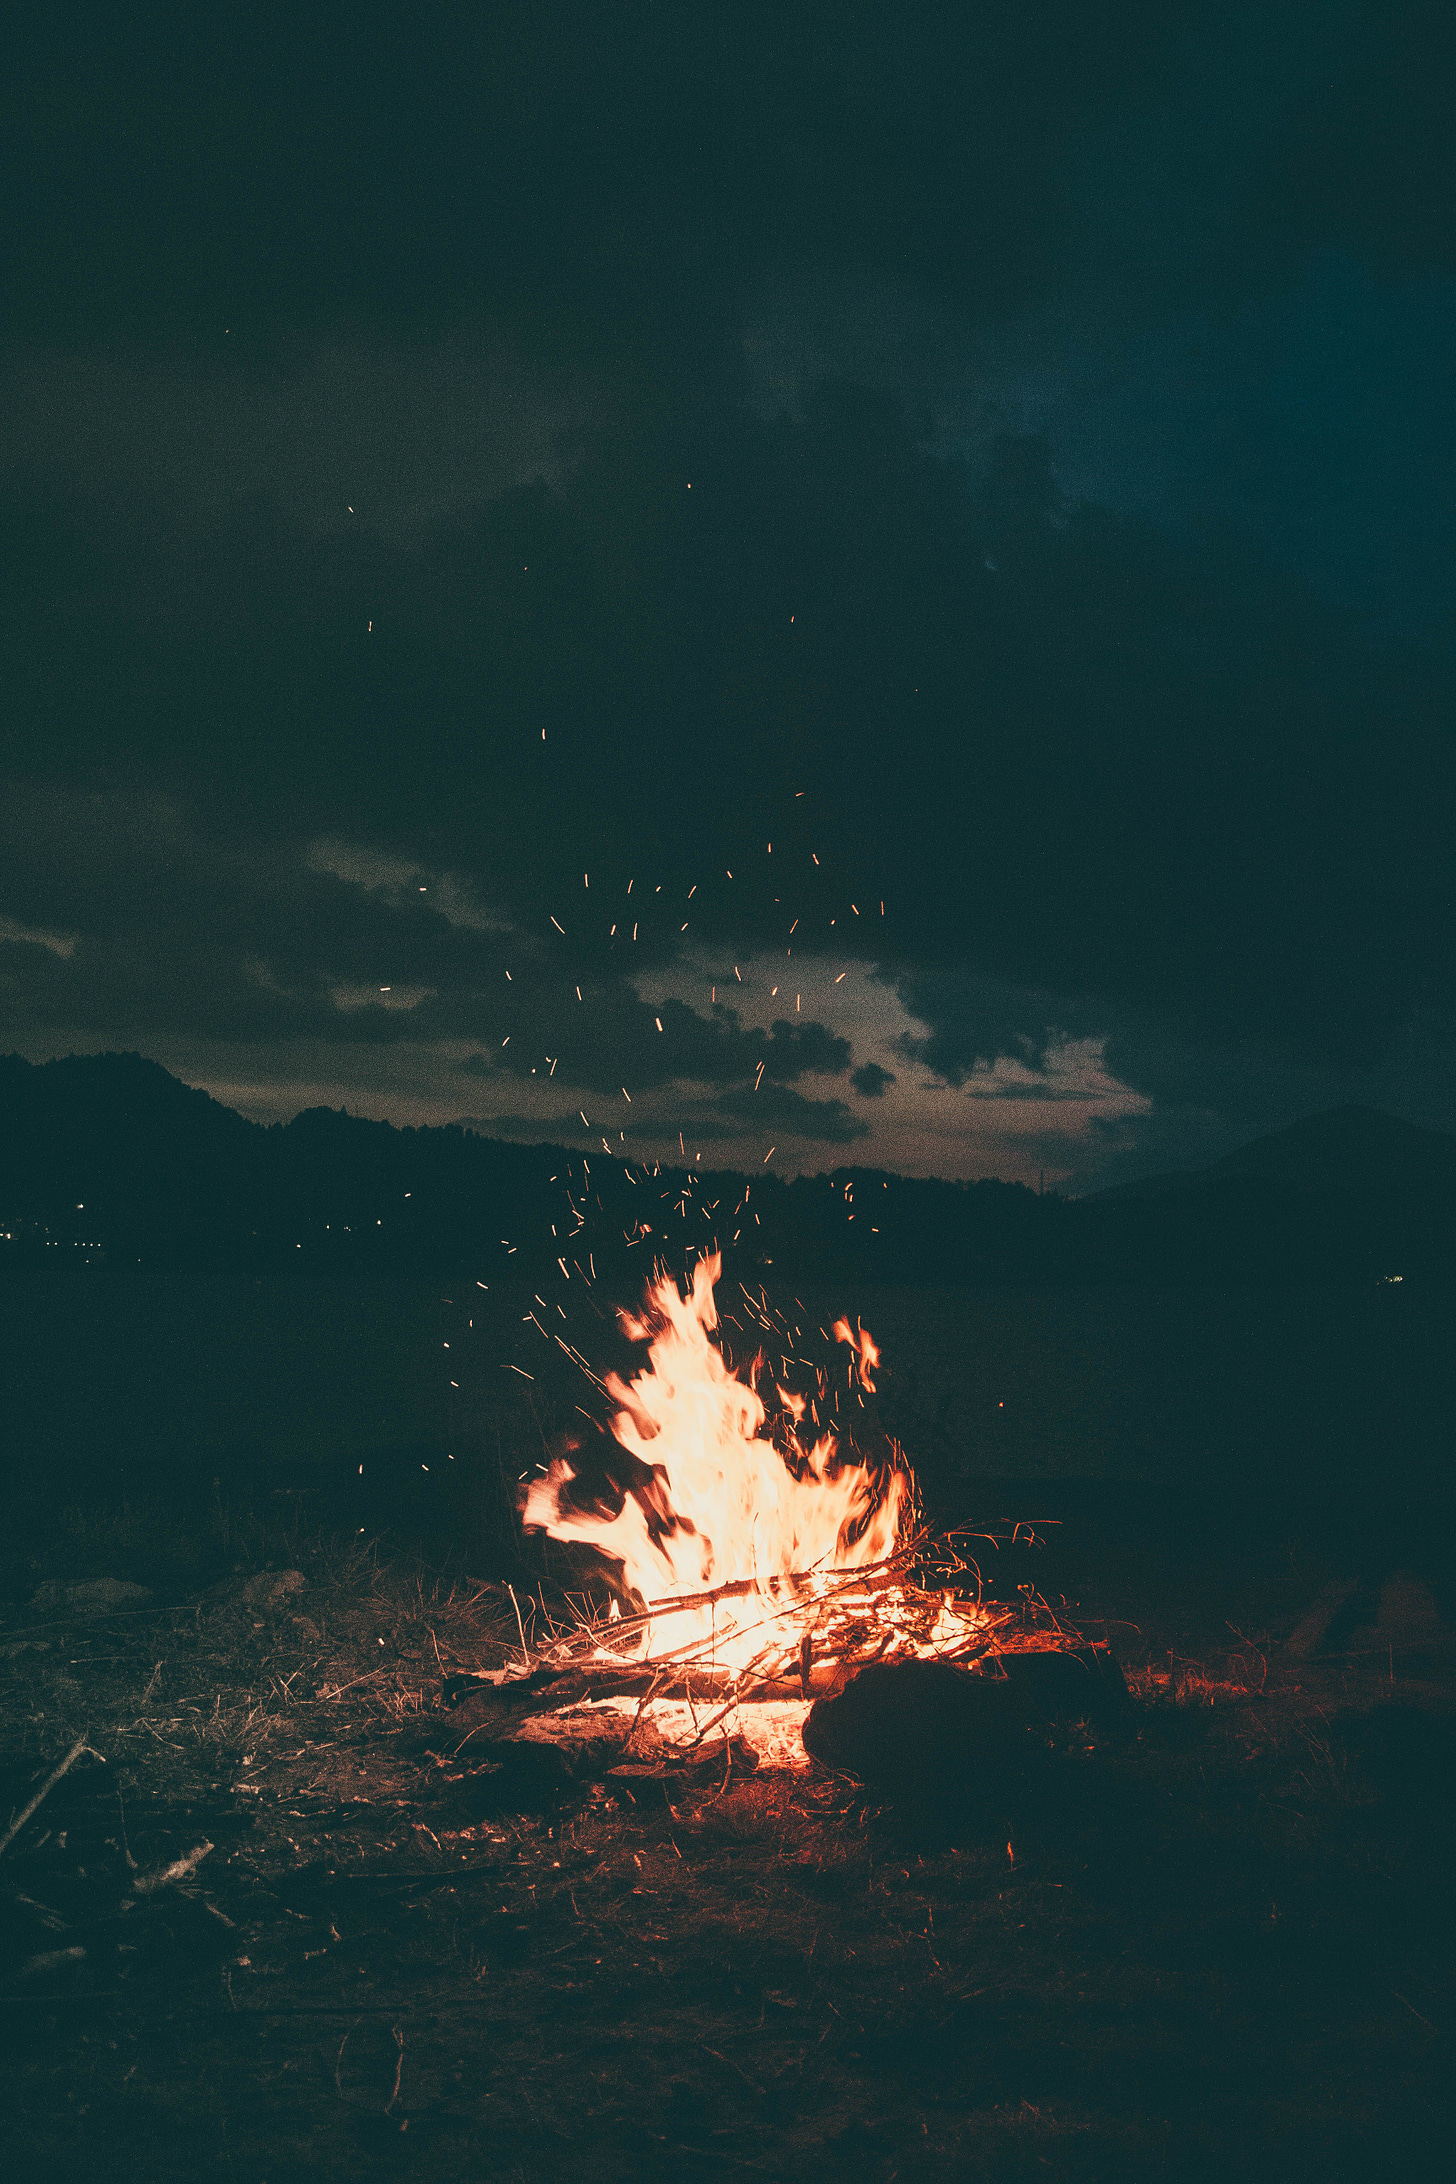 Free Lit Bonfire Outdoors during Nighttime Stock Photo